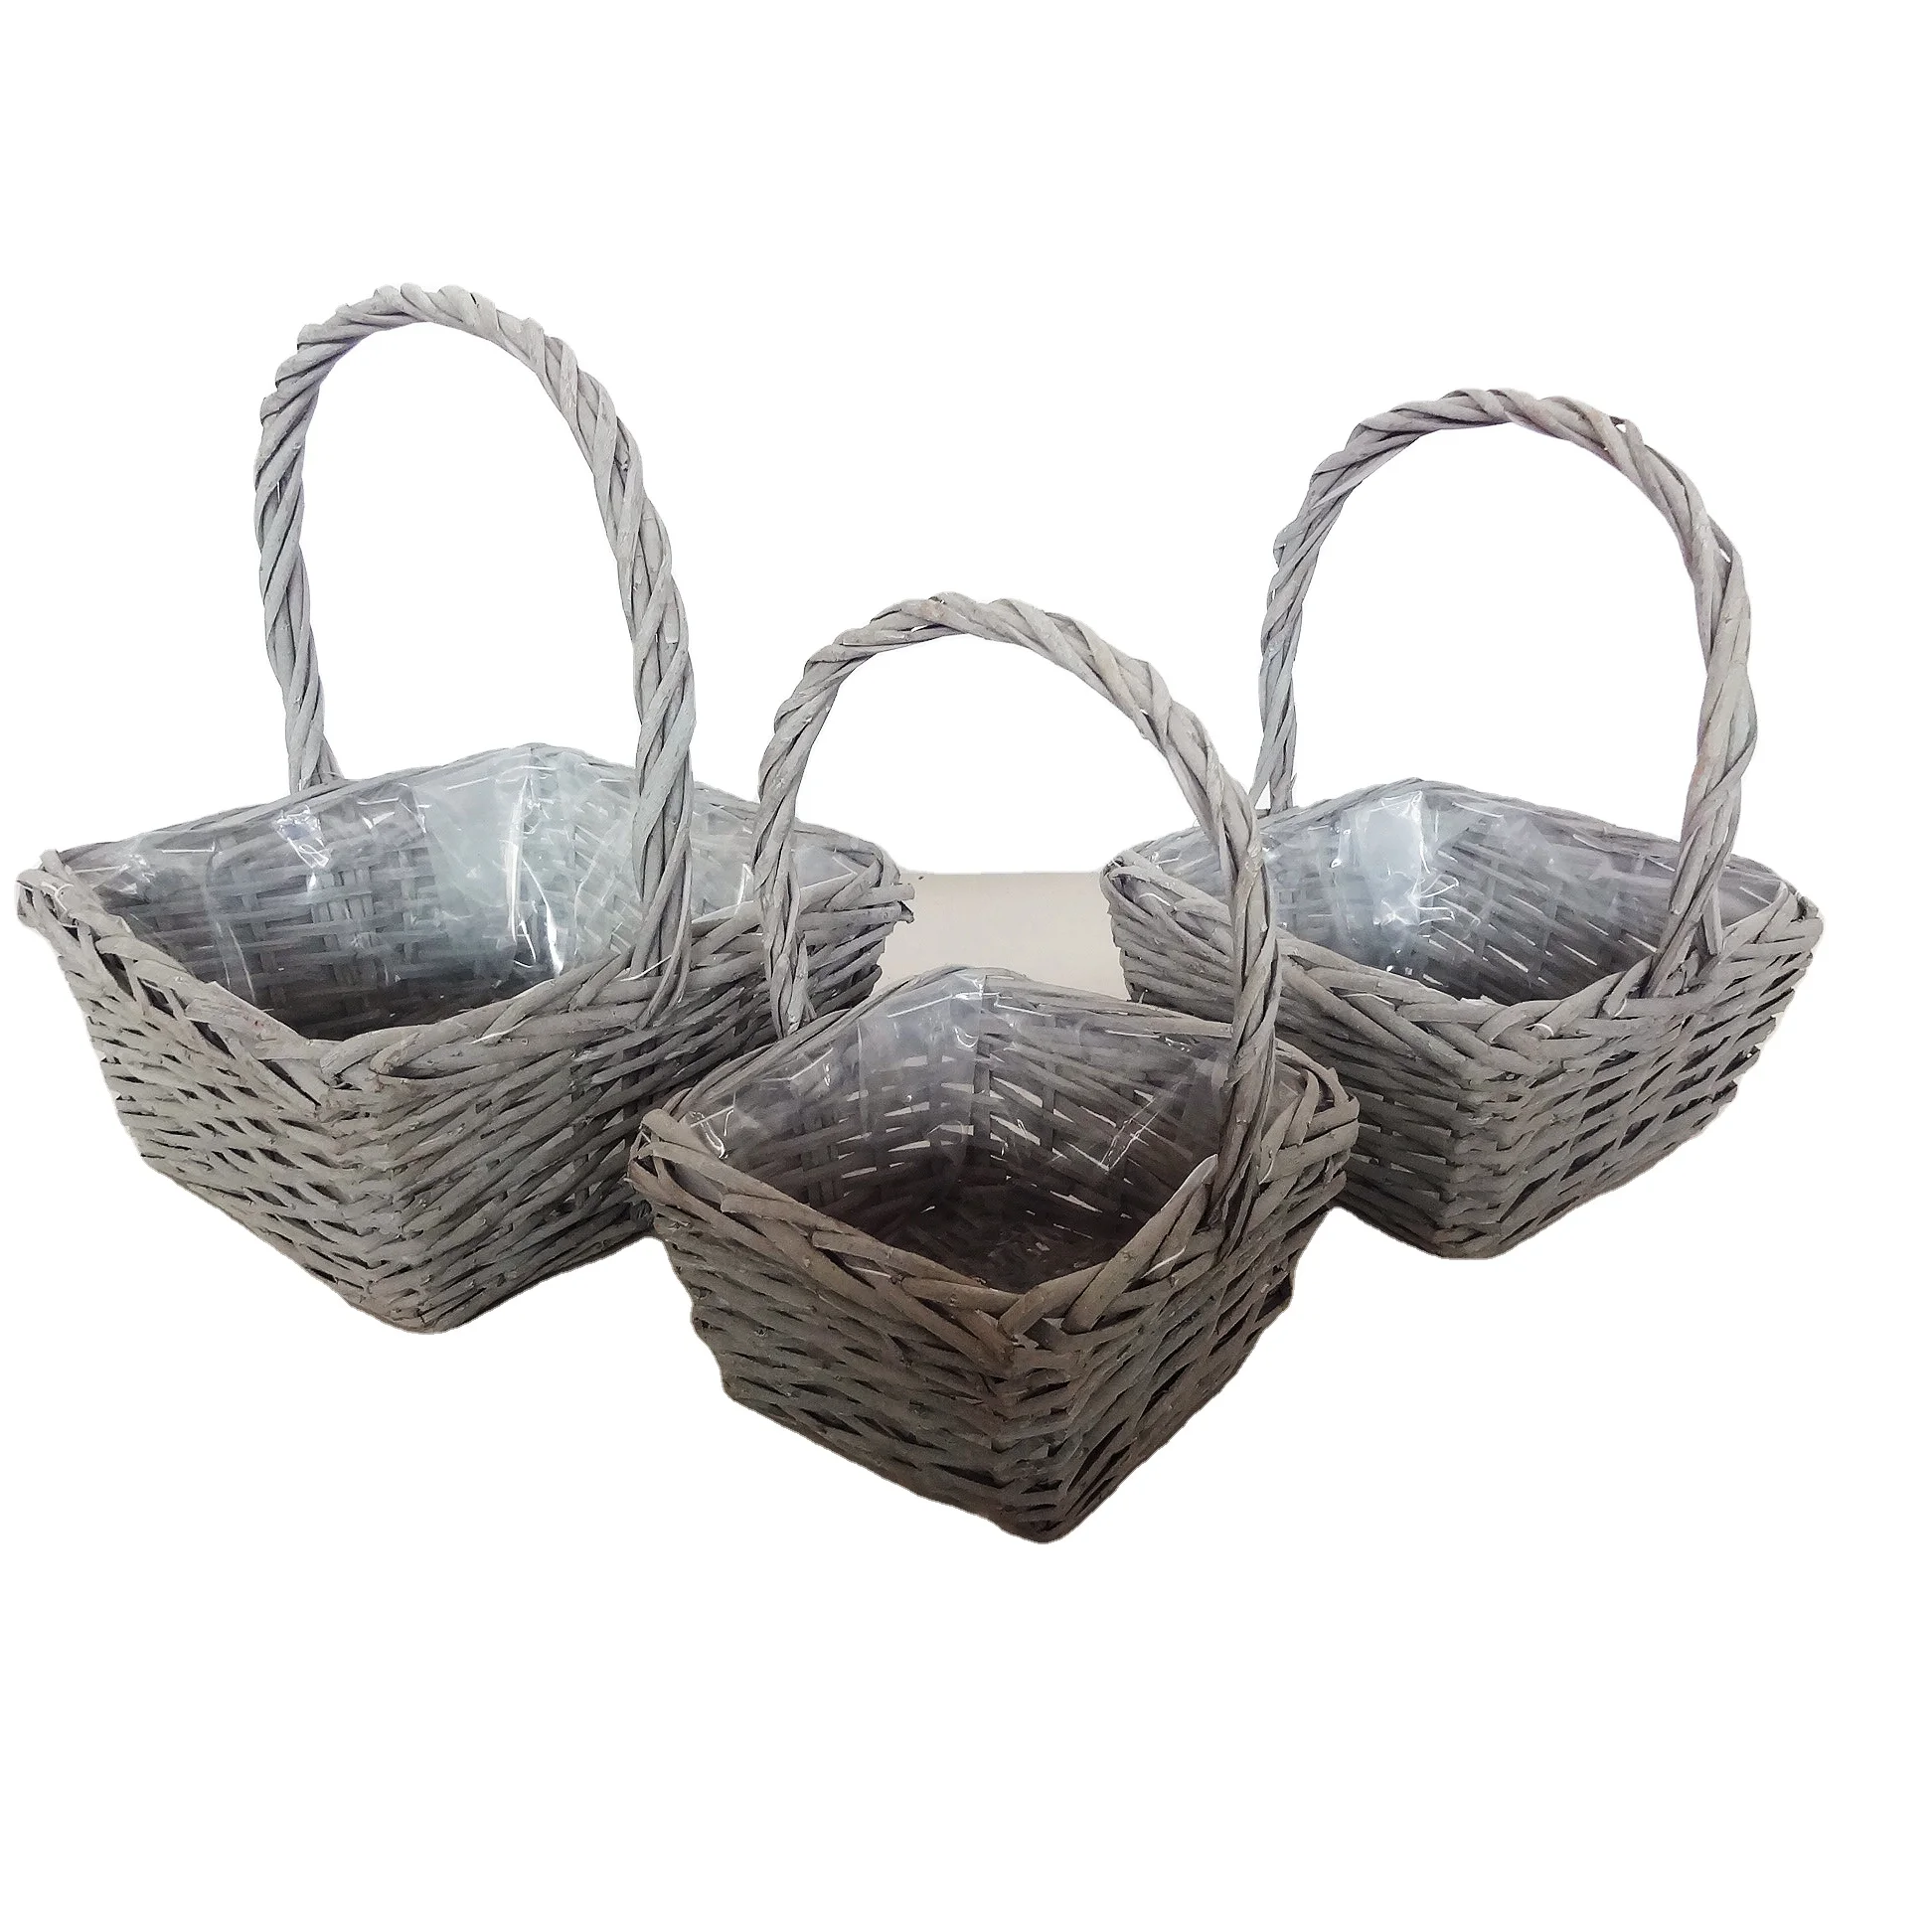 
Hand Made Wicker Basket /Wicker Picnic Basket /Shopping Storage Hamper with factory& lower cost  (1600251117040)